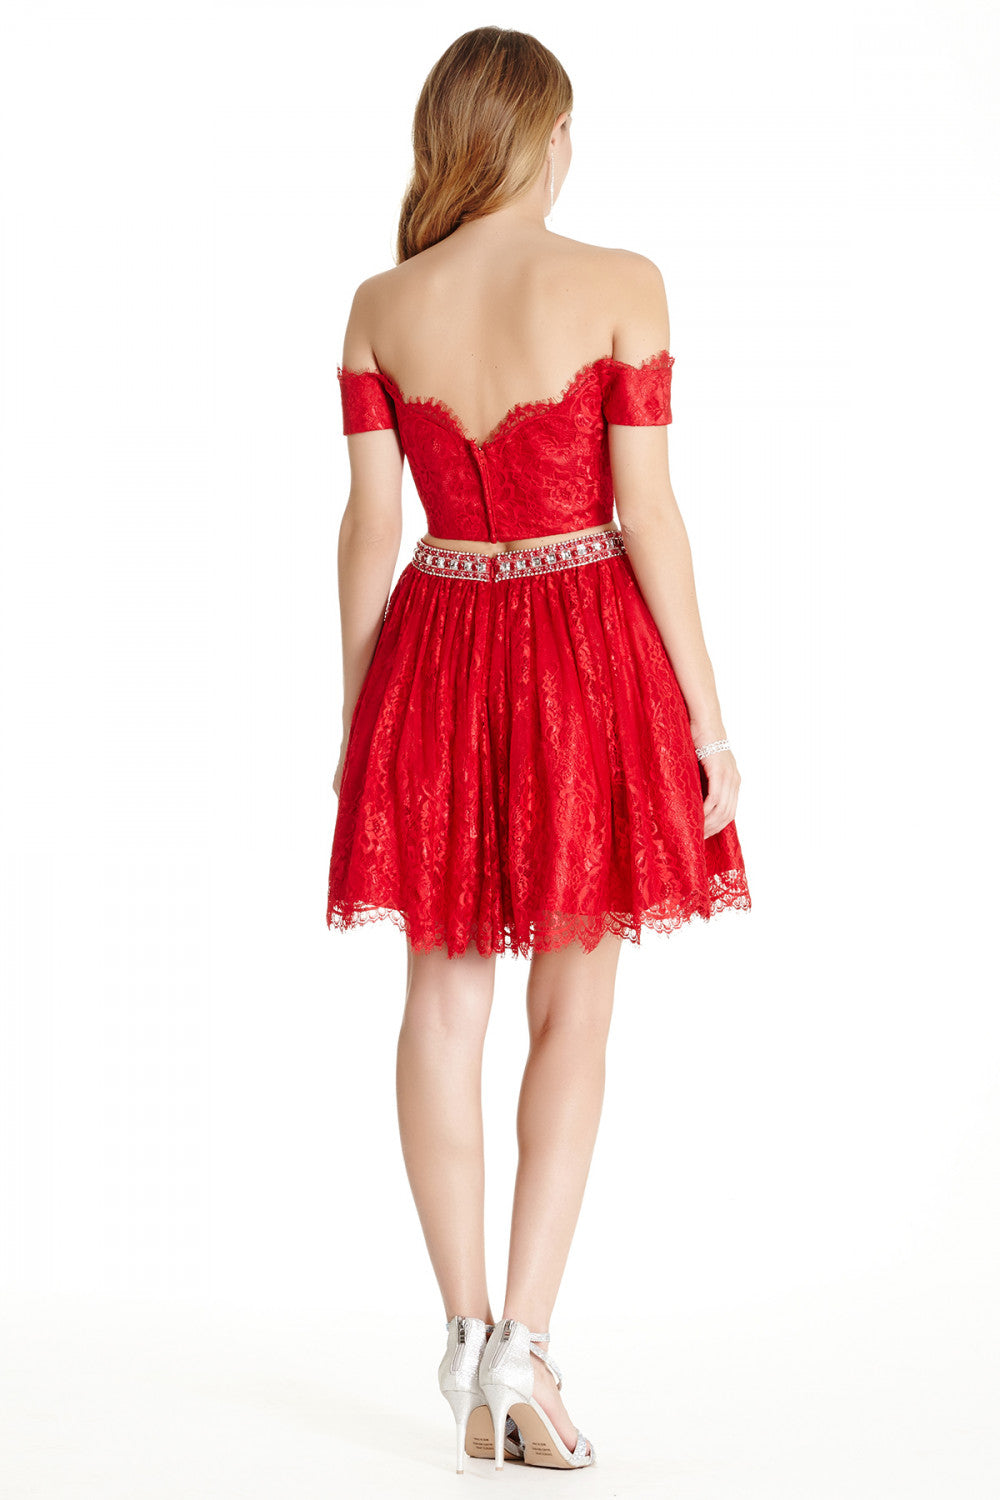 Aspeed Design -S1777 Laced Two Piece Short Cocktail Dress